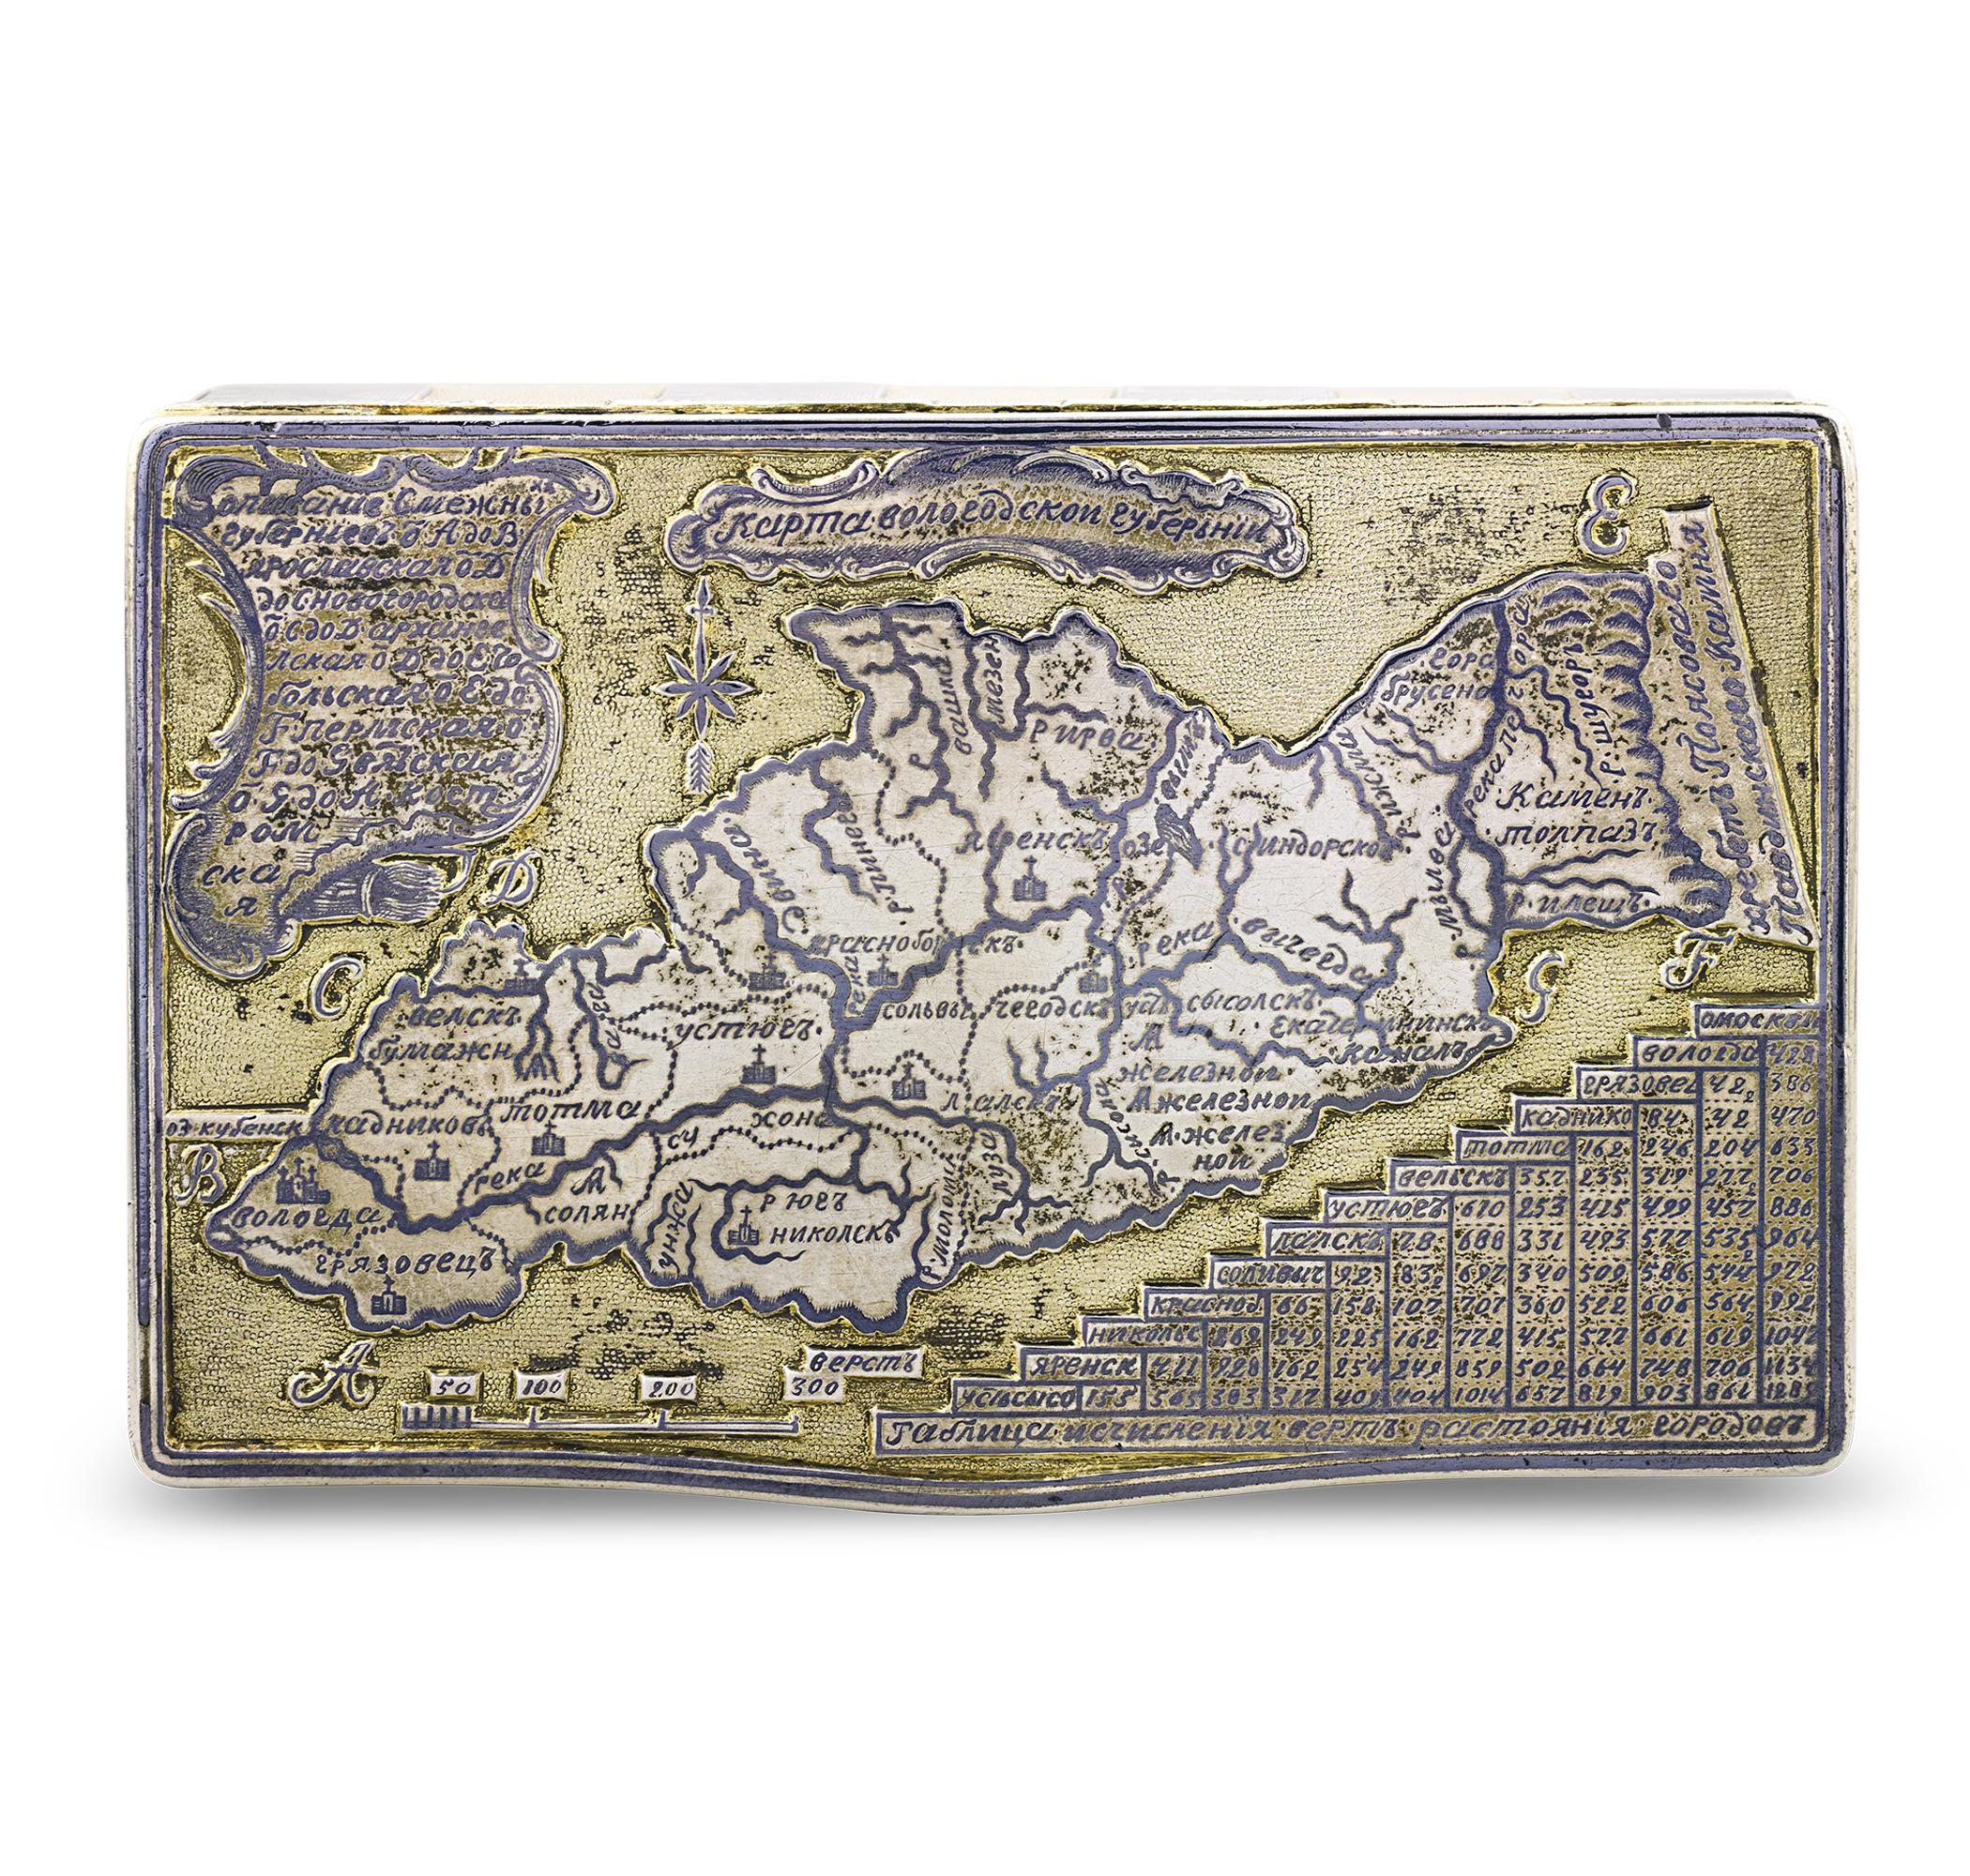 This silver, gold and niello inlaid topographical snuffbox is a masterpiece of Russian silver. Almost owned by a wealthy 19th-century tradesman, this extraordinary creation shares a remarkable story of trade, travel and silver craftsmanship along